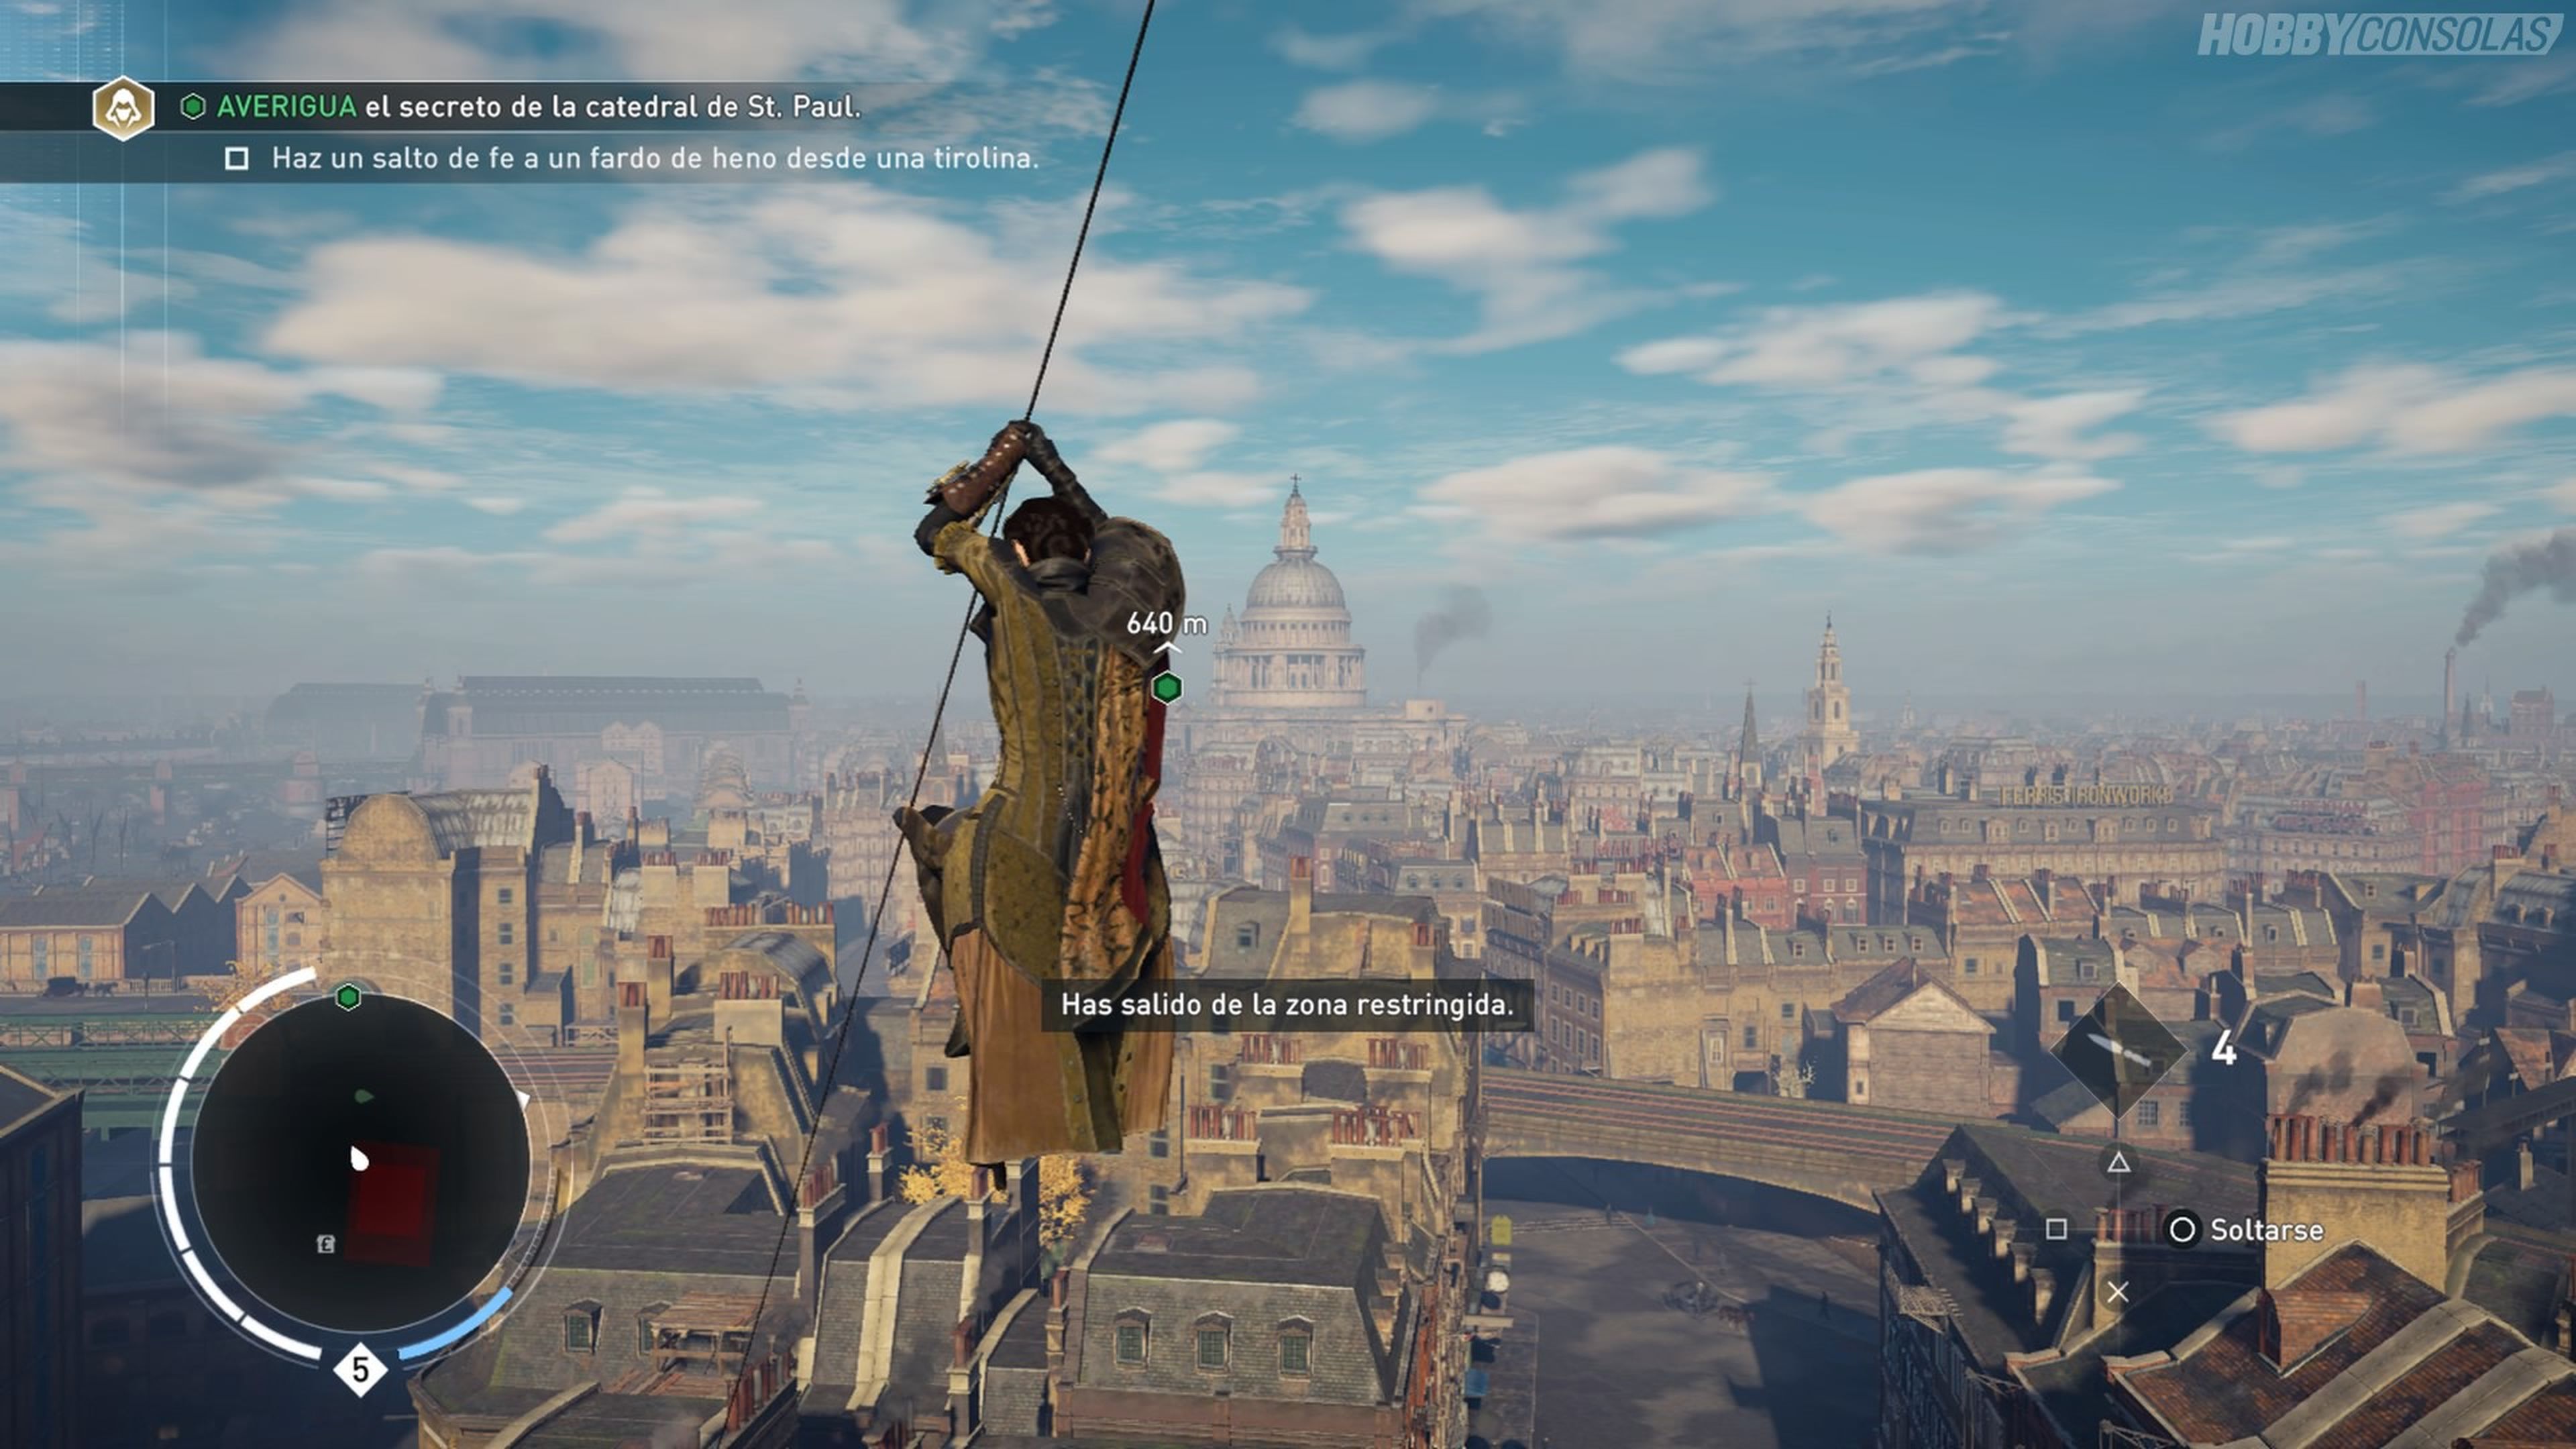 Análisis de Assassin's Creed Syndicate